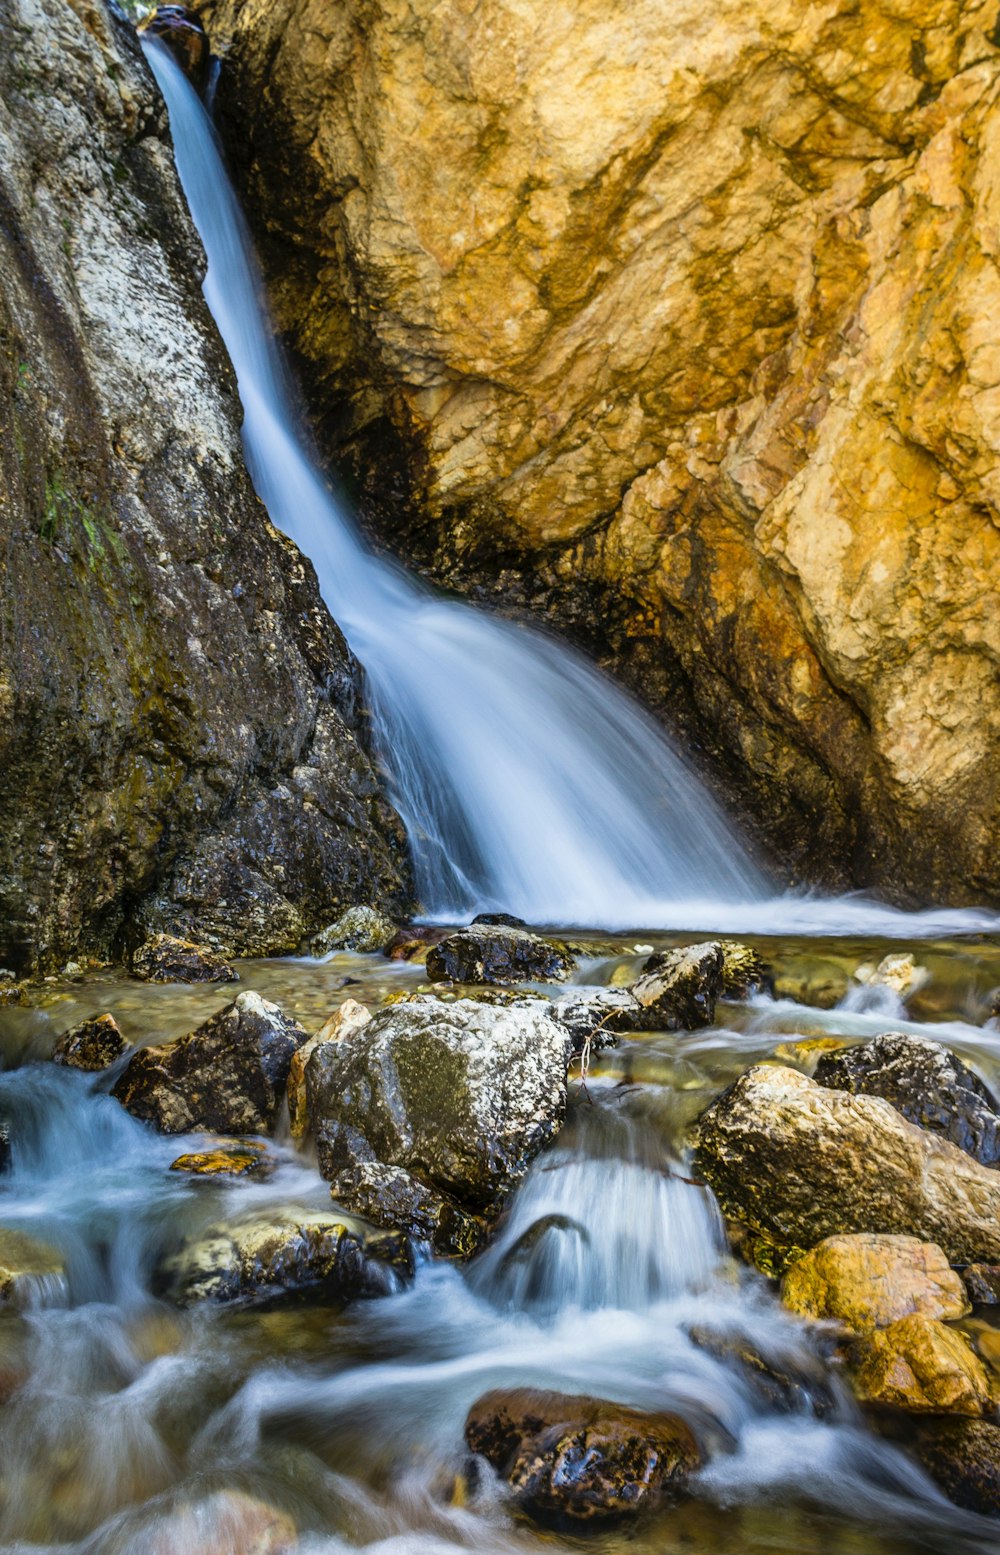 a small waterfall flowing over rocks into a river